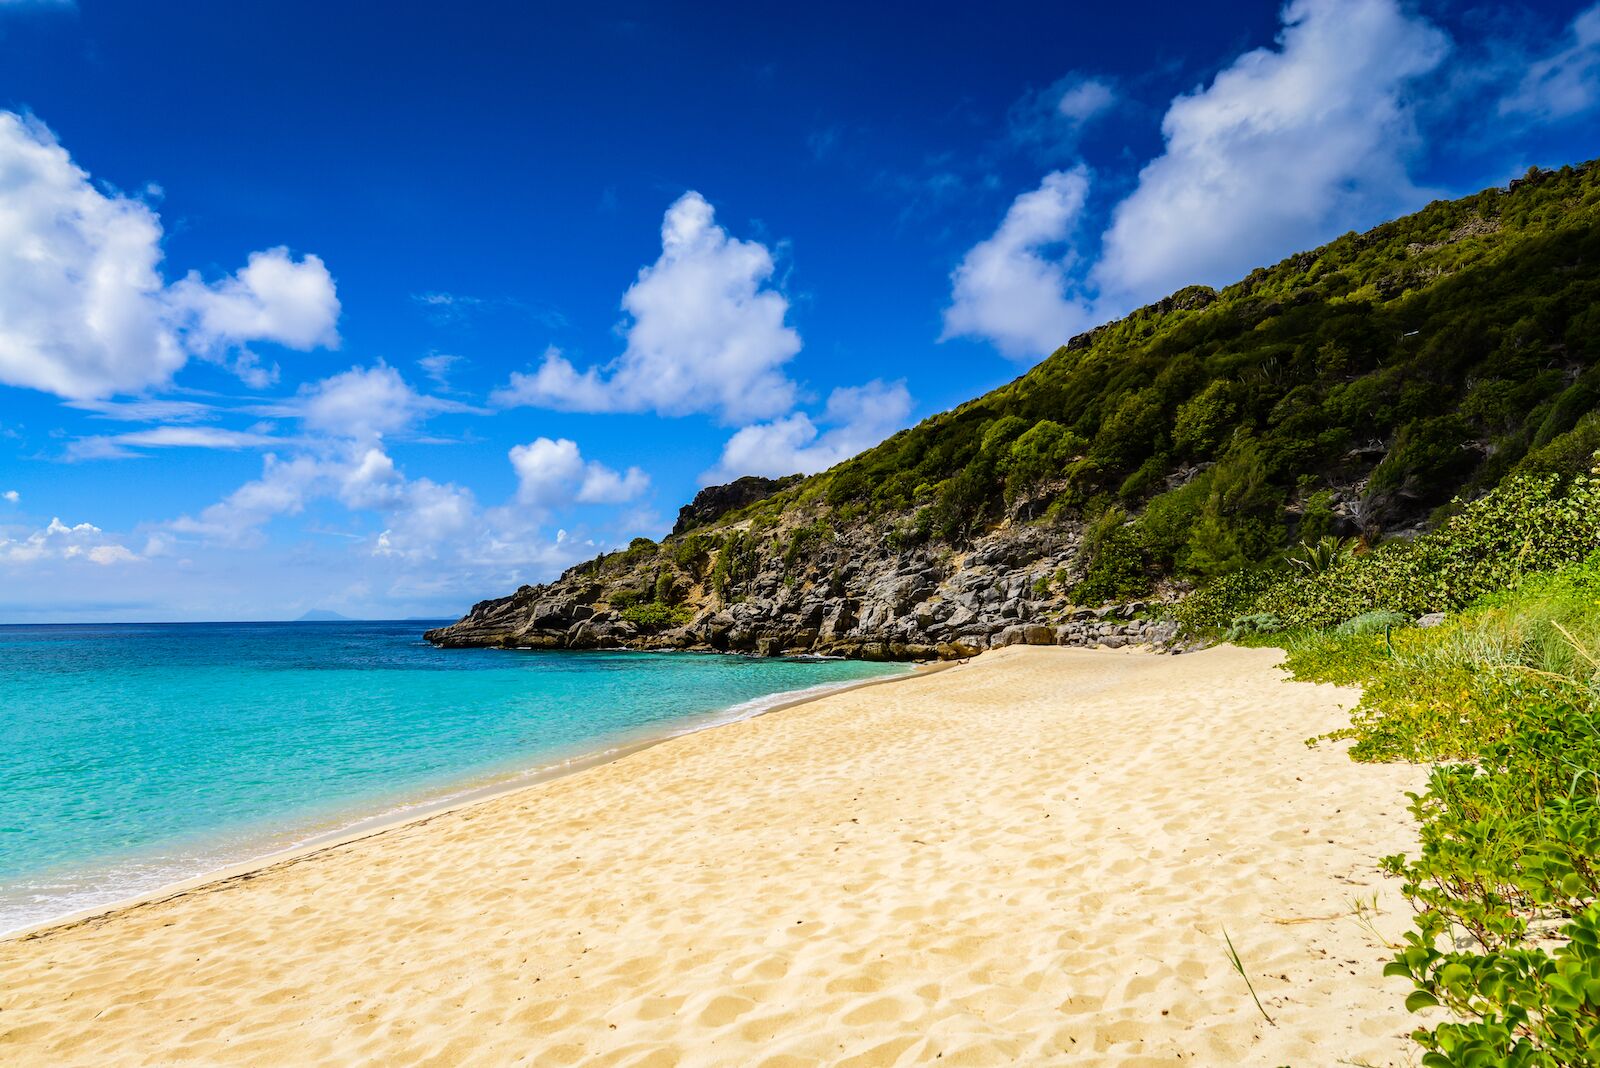 Remote and private Gouverneur Beach on the French Caribbean island of Saint Barthélemy (St Barts.)